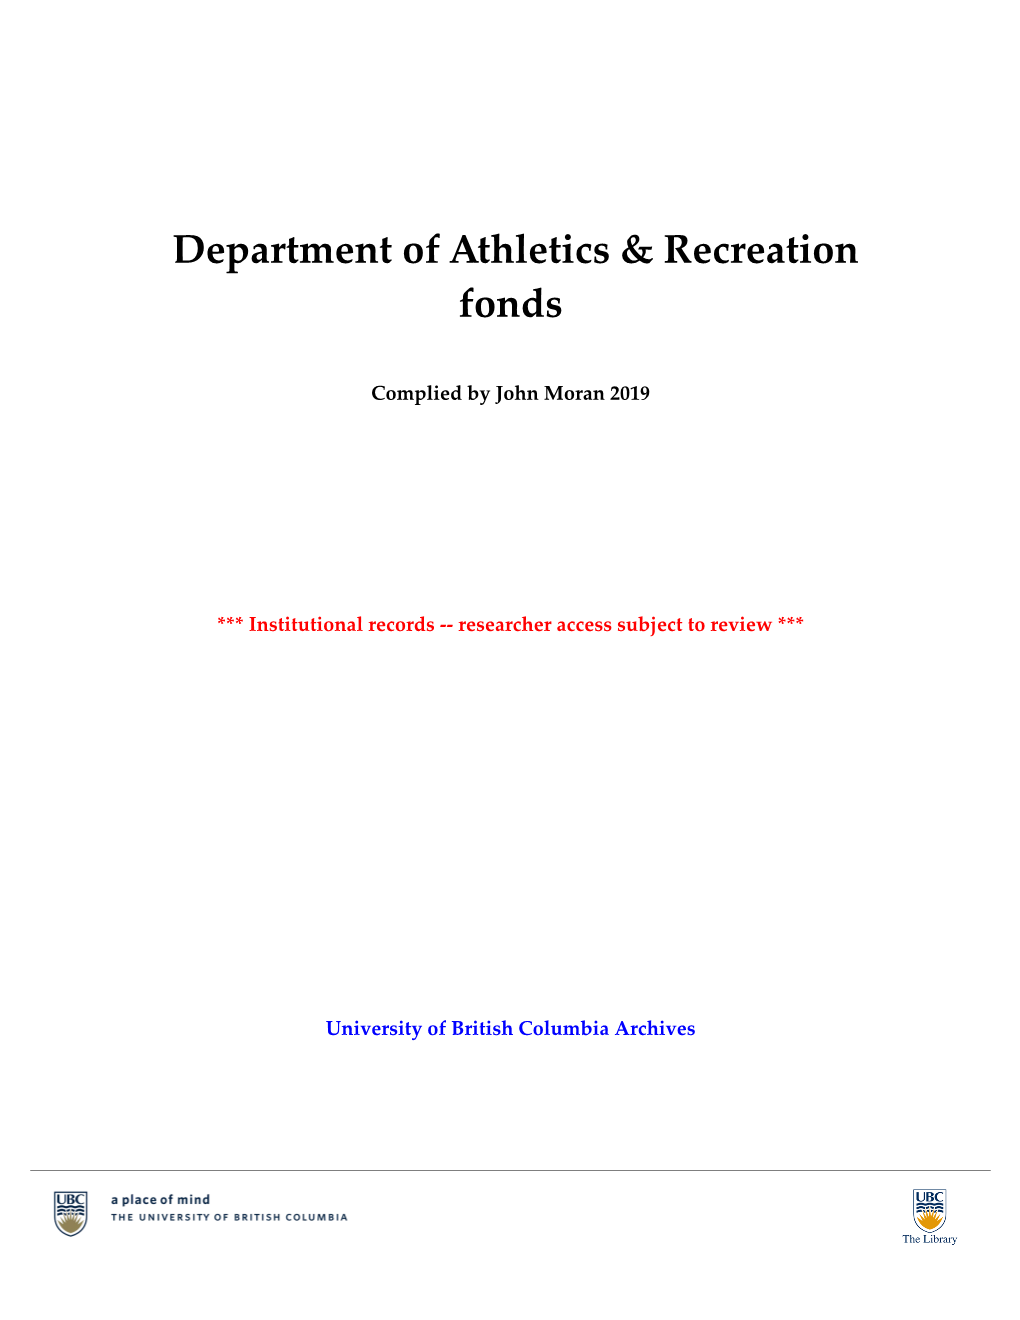 Department of Athletics and Recreation Fonds Are Representative of the Athletics Side of the Department of Athletics and Recreation